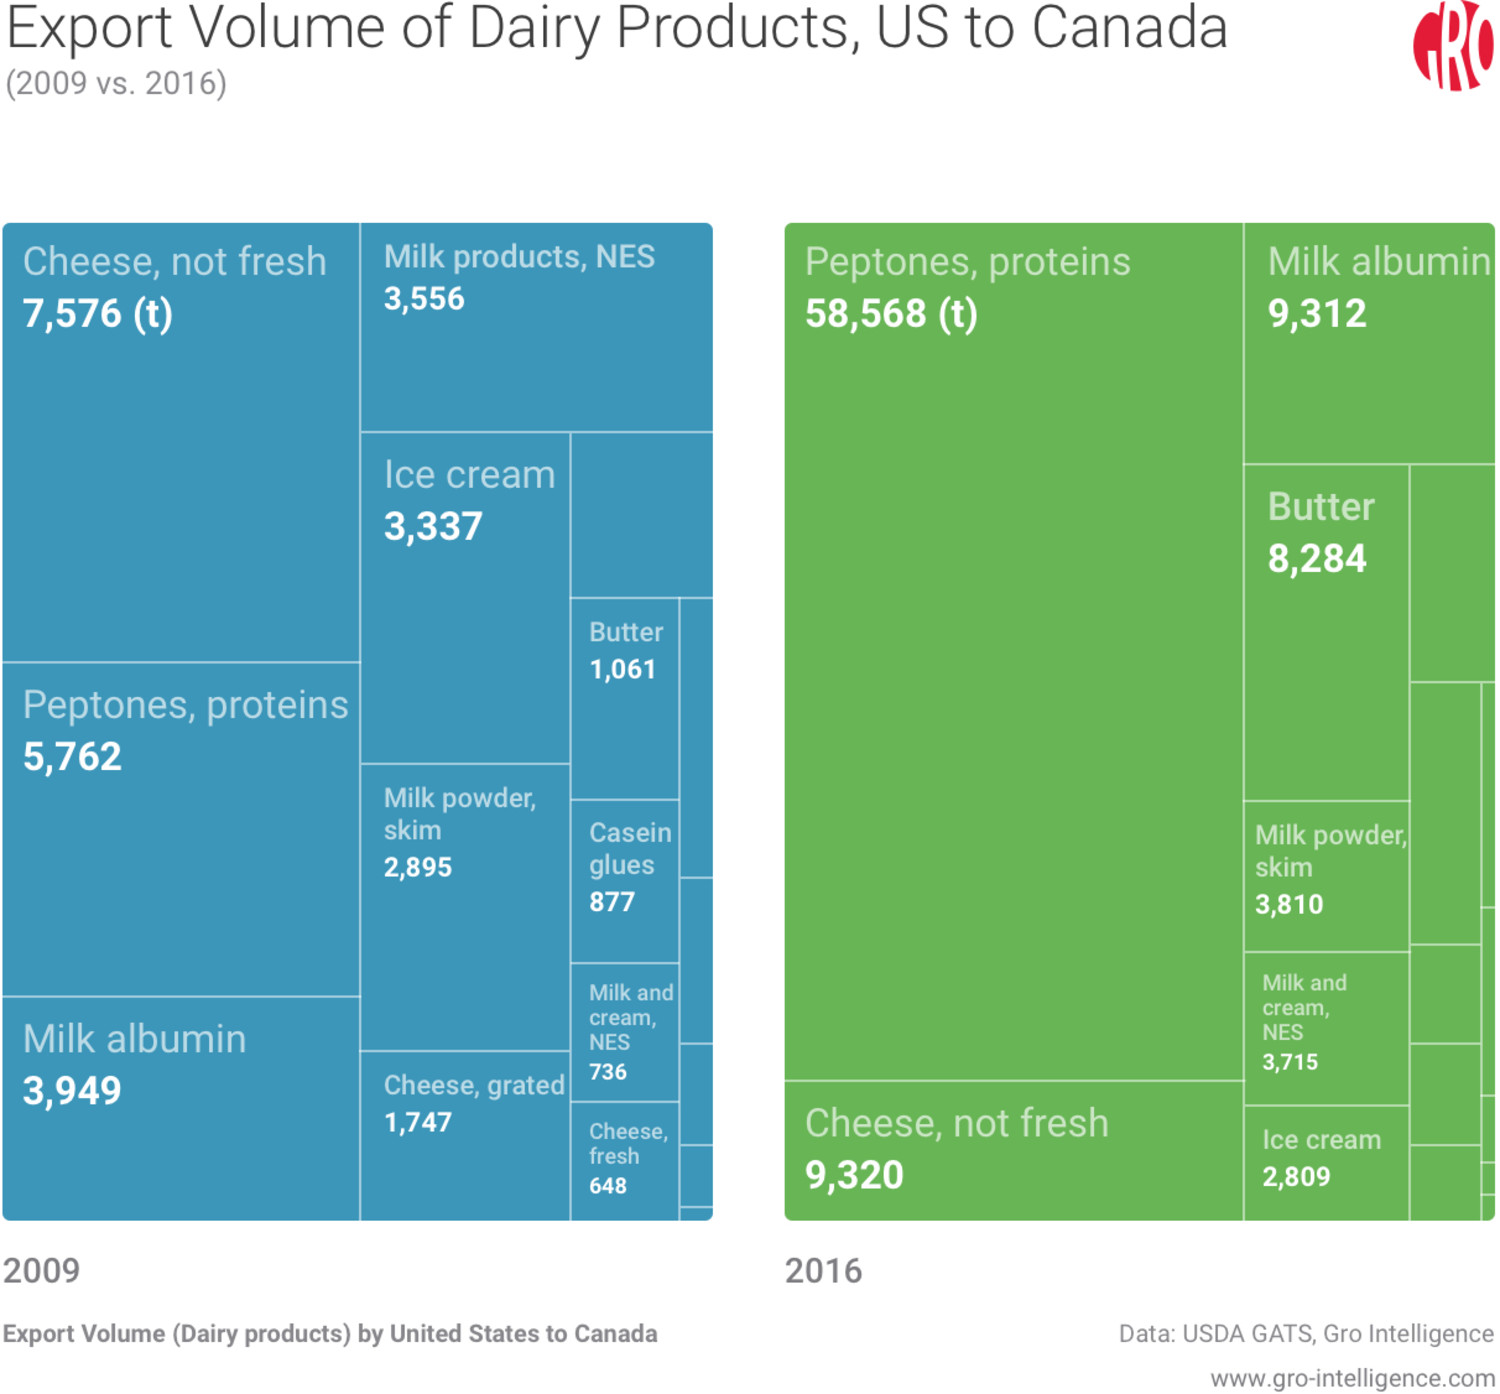 Export volume of dairy products, US to Canada